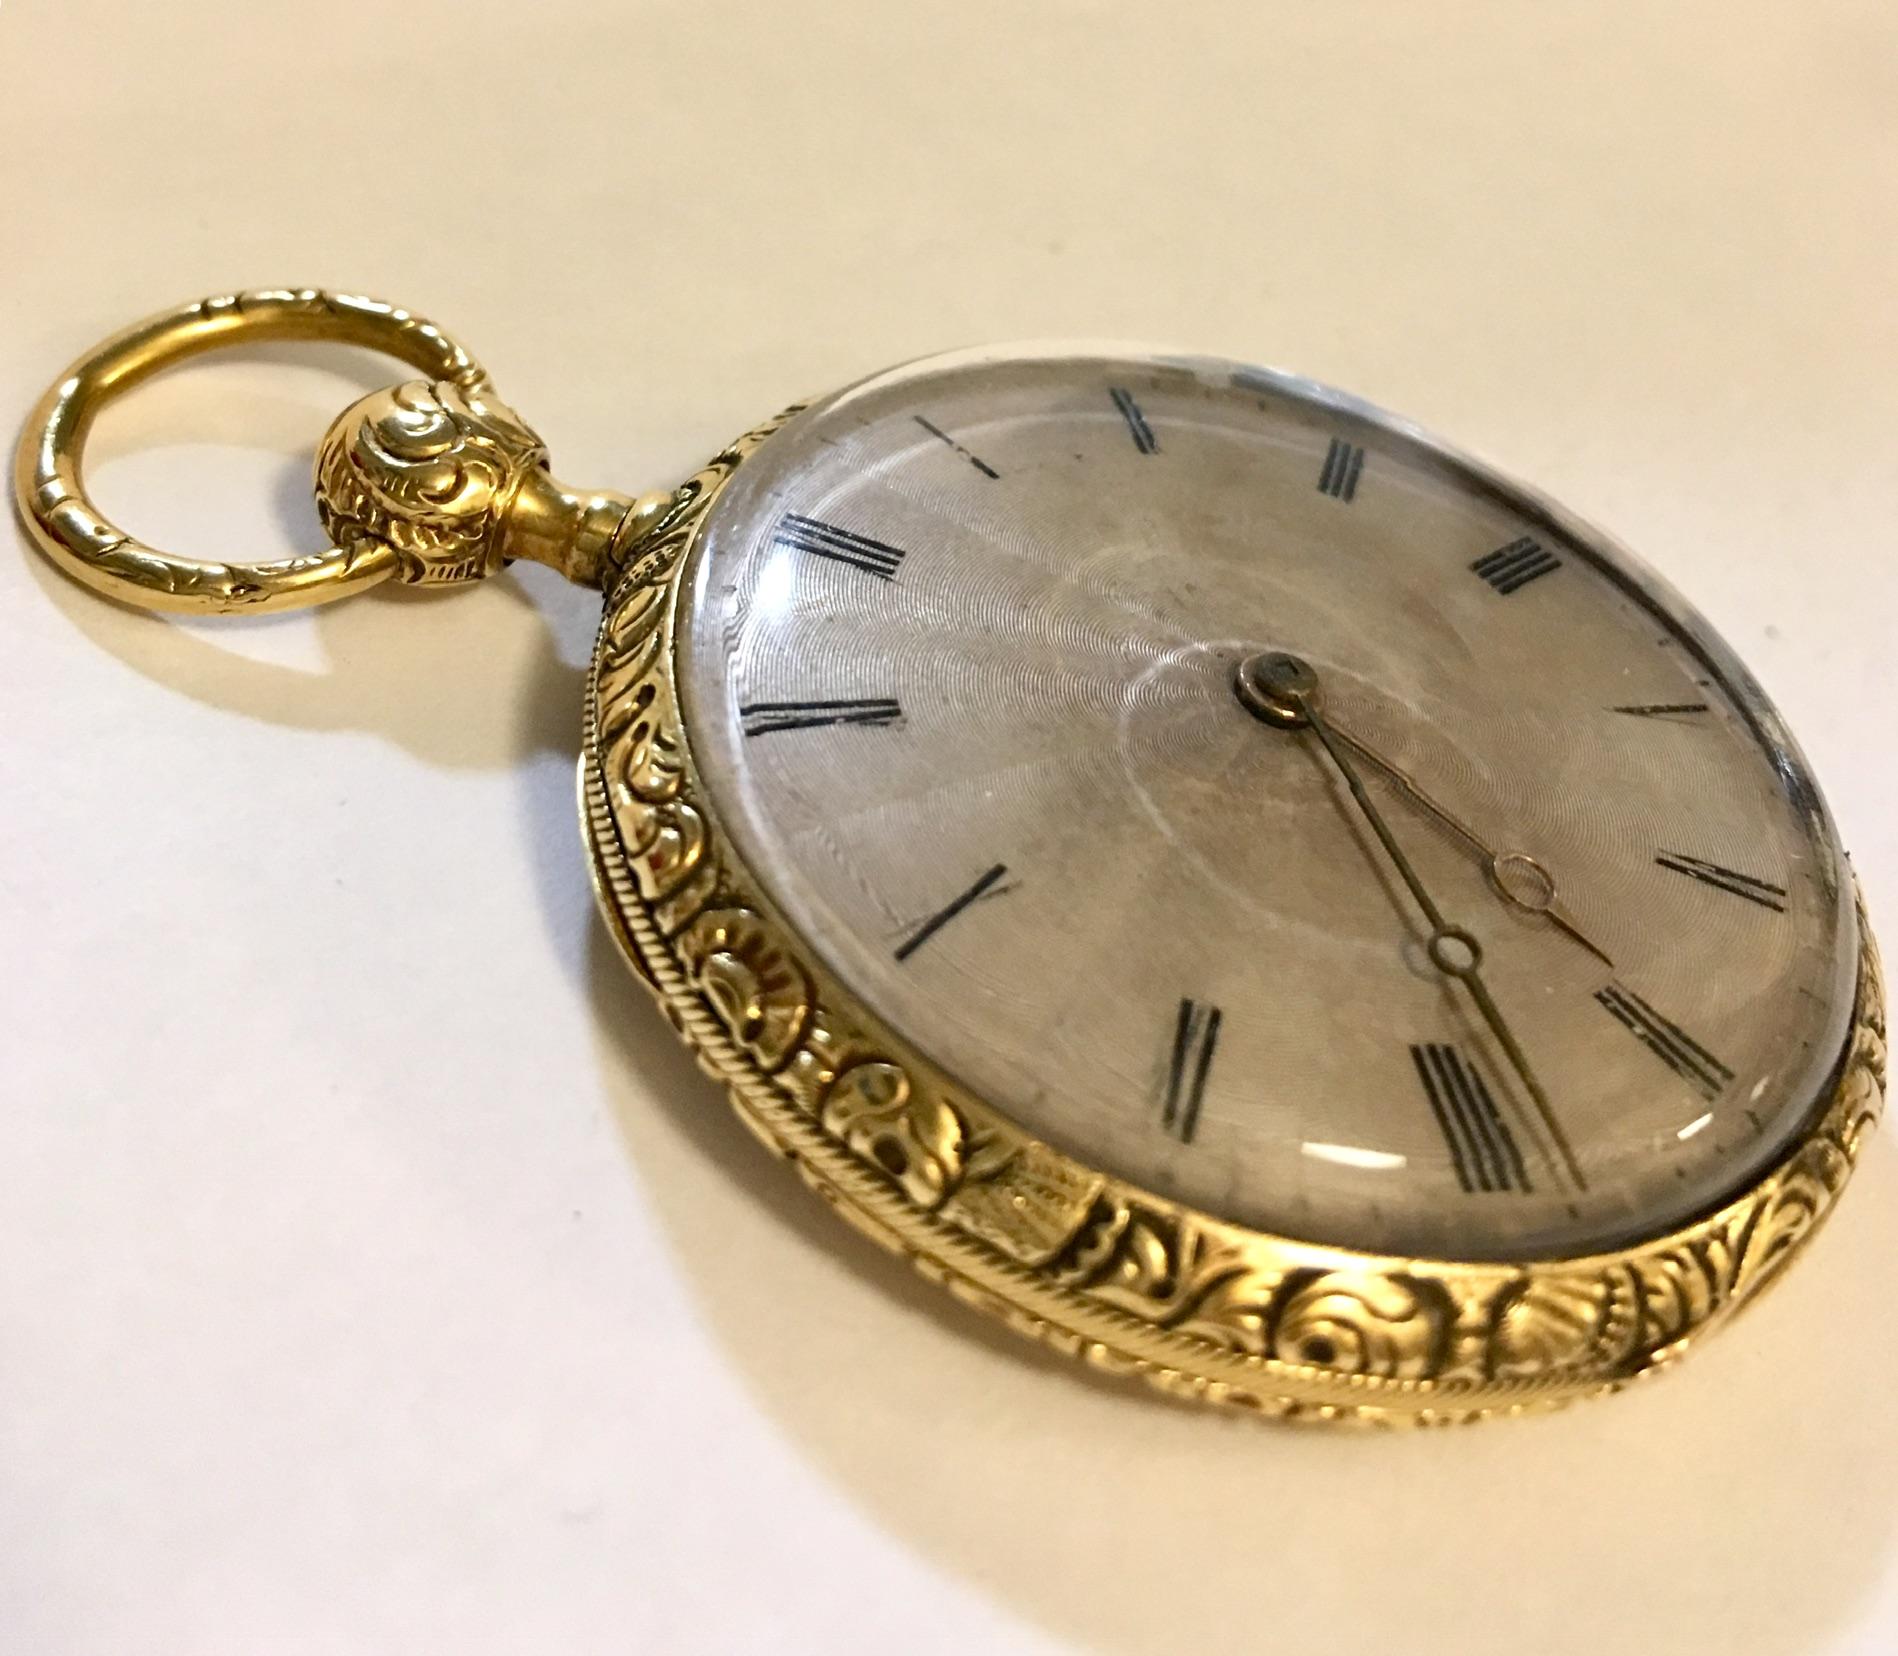 A fine antique 18k gold quarter repeater lightweight pocket. Nice silver dial and breguet hand. It striking mechanism on a gong and is in good working condition. Finely made and very slim. This watch measured 45mm diameter and weighed 55.1 grams.